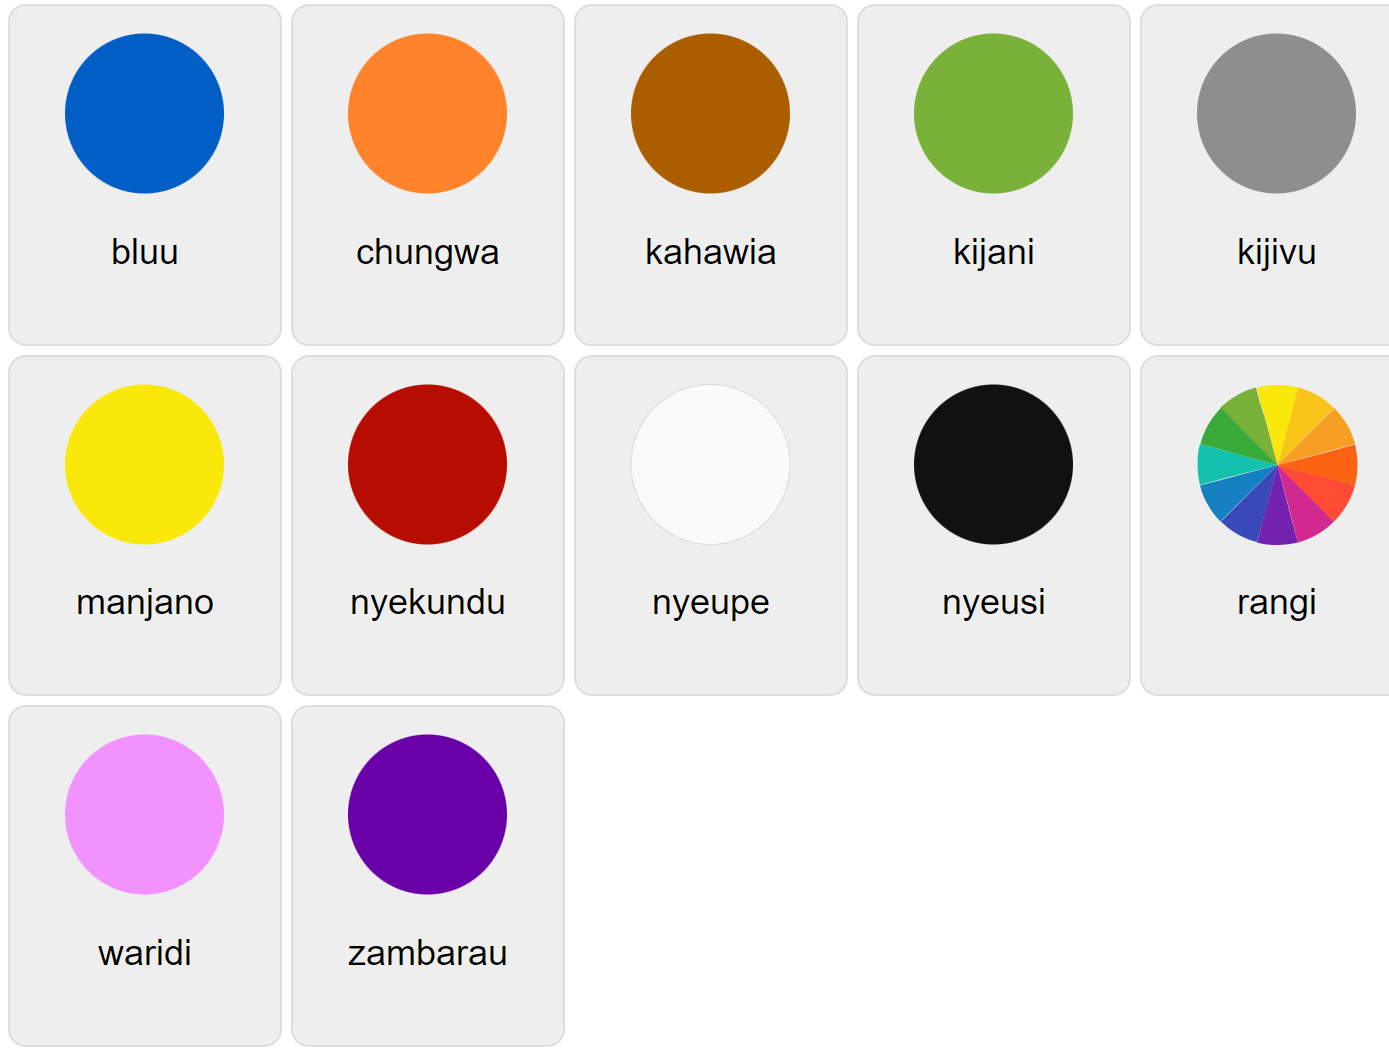 Colors in Swahili